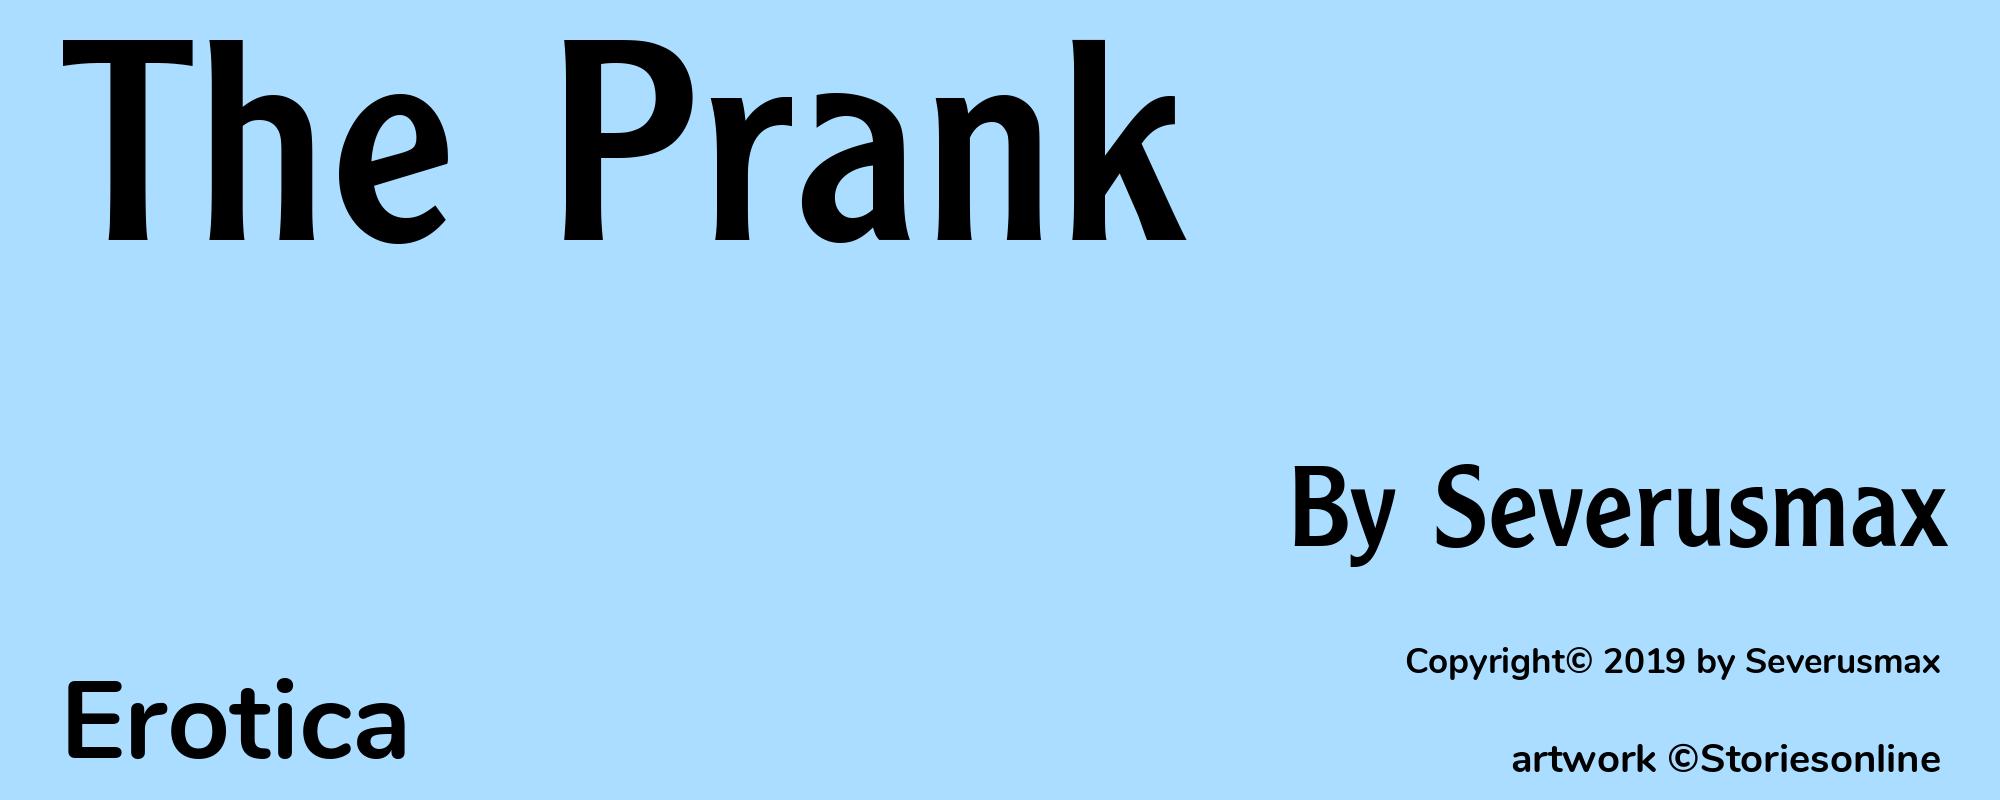 The Prank - Cover